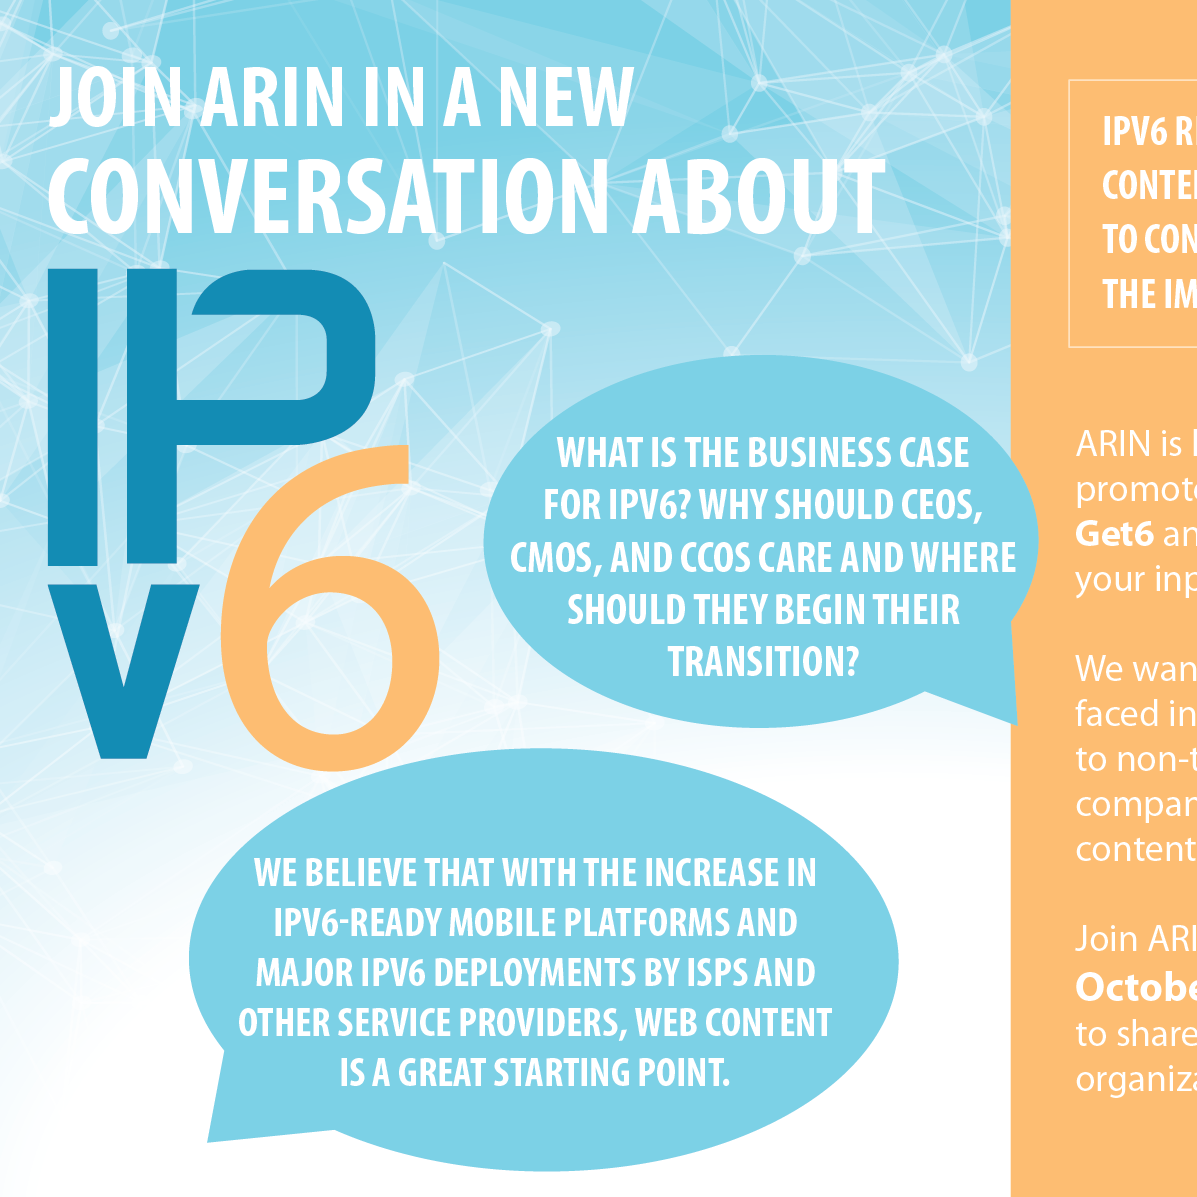 Help ARIN Shape Our New IPv6 Campaign